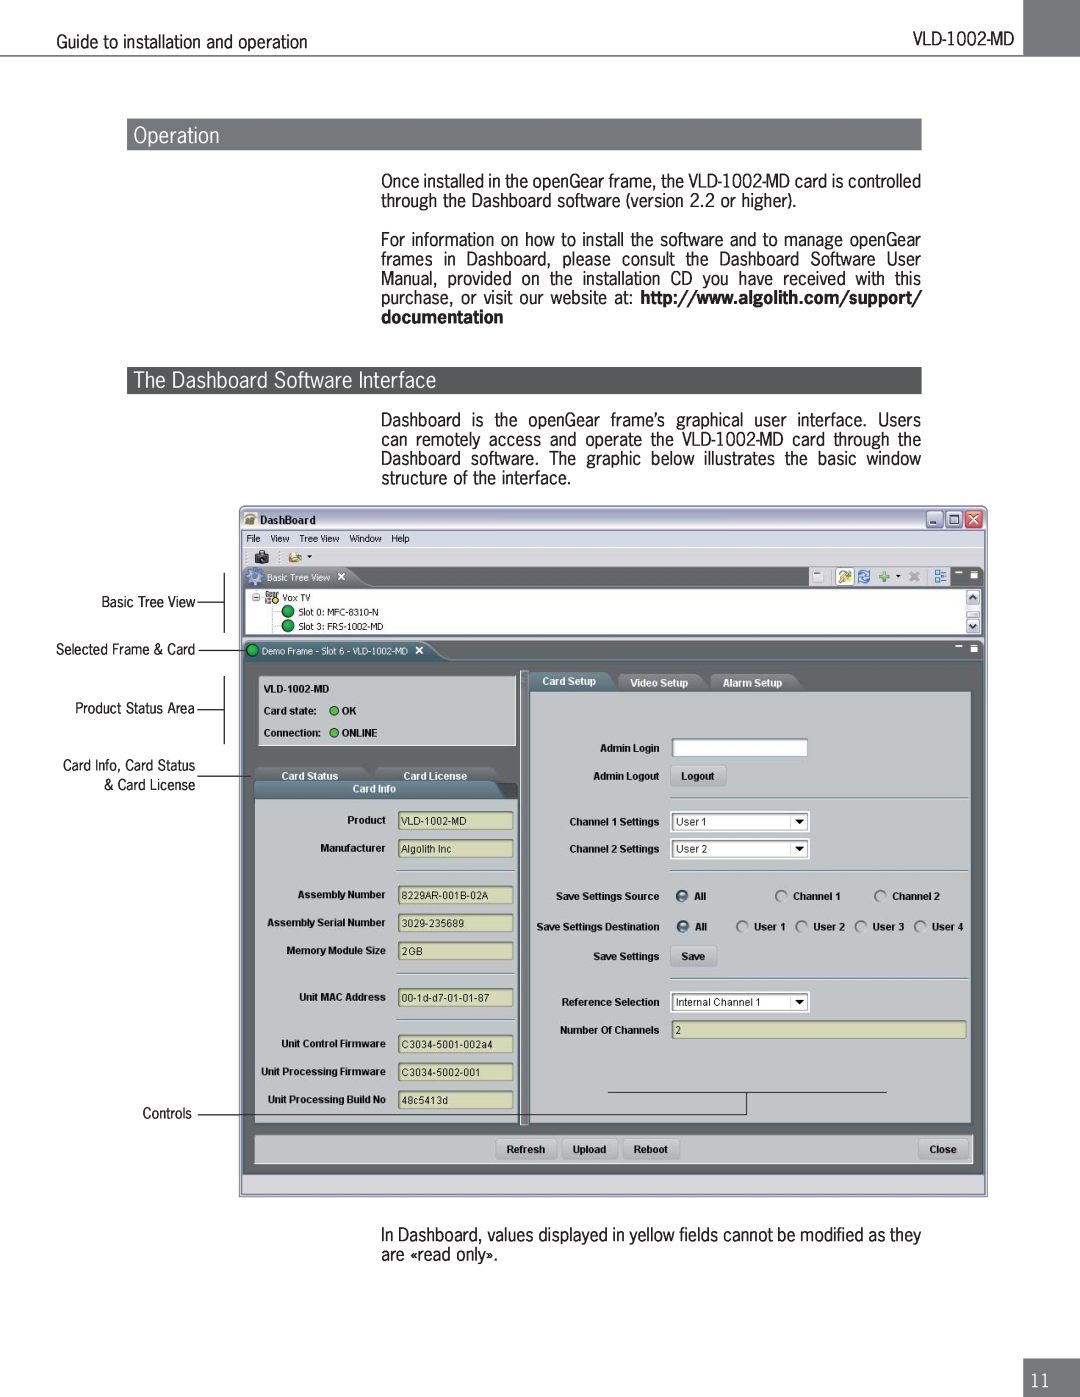 Algolith VLD-1002-MD operation manual Operation, The Dashboard Software Interface 